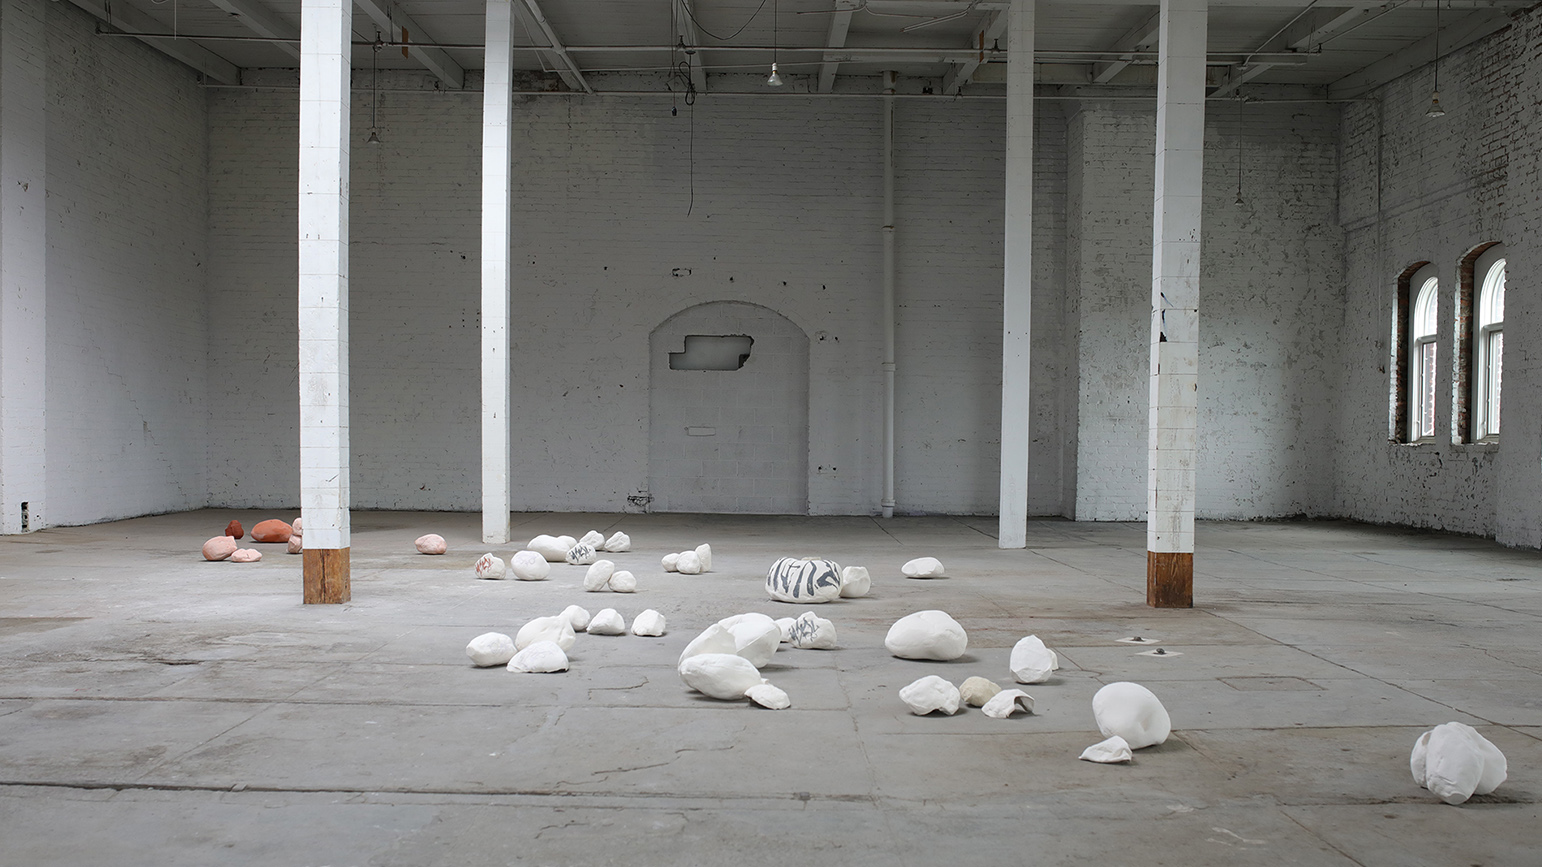 Small ceramic sculptures installed on the floor of an old industrial space